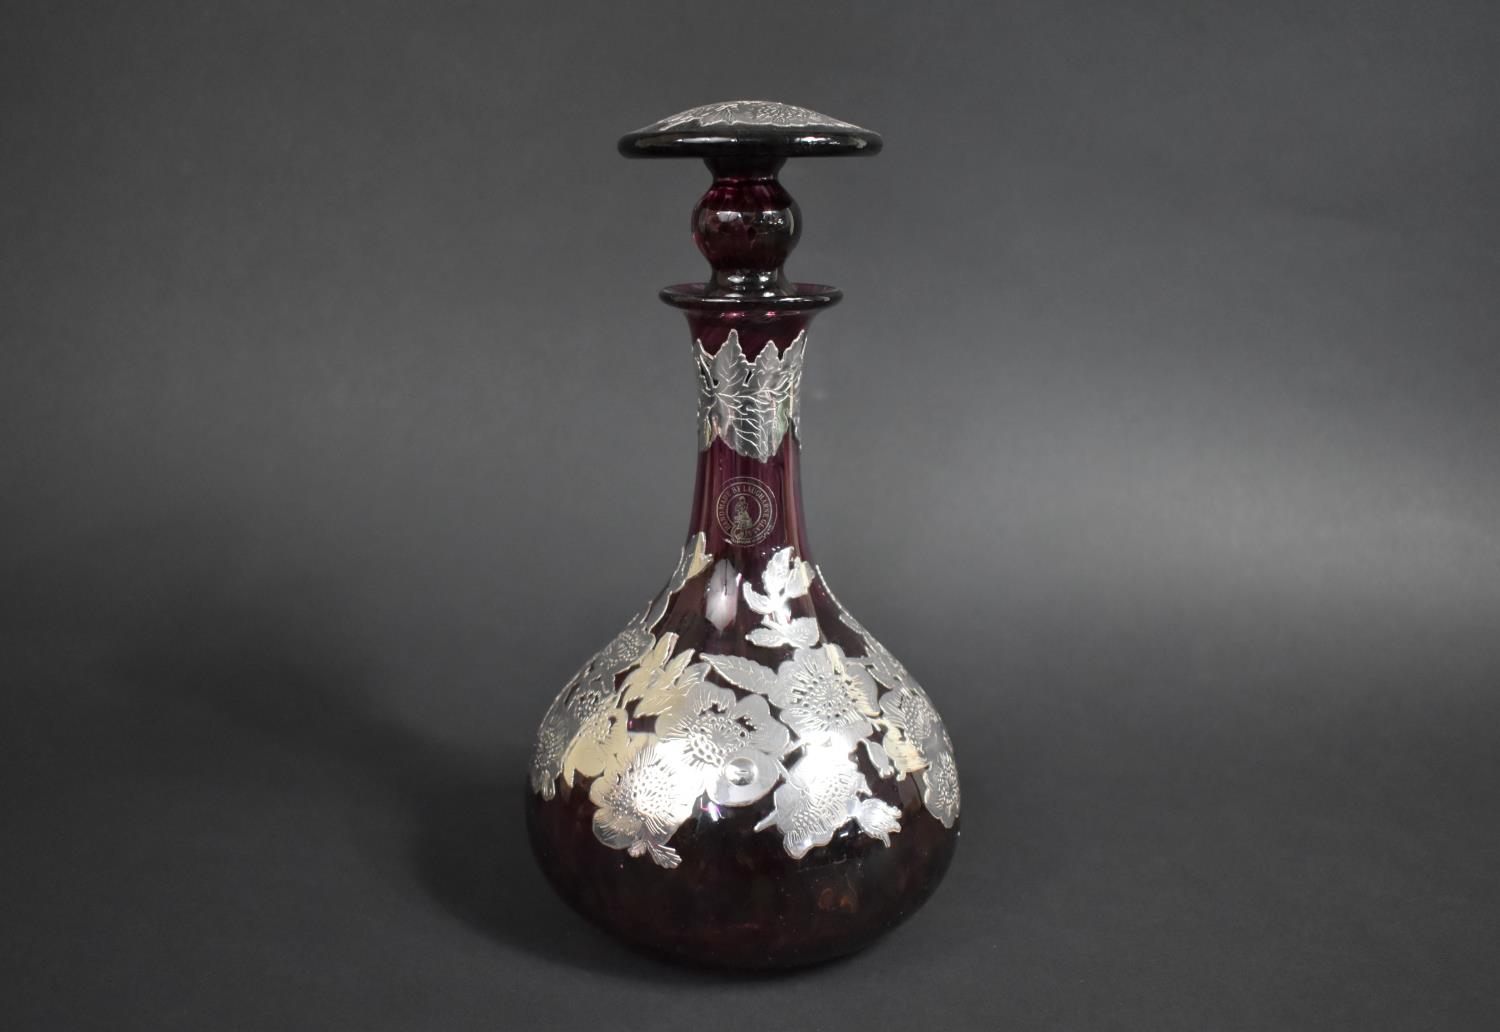 A Handmade Cranberry Glass and Silver Overlaid Decanter by Laugharne, 26cm high